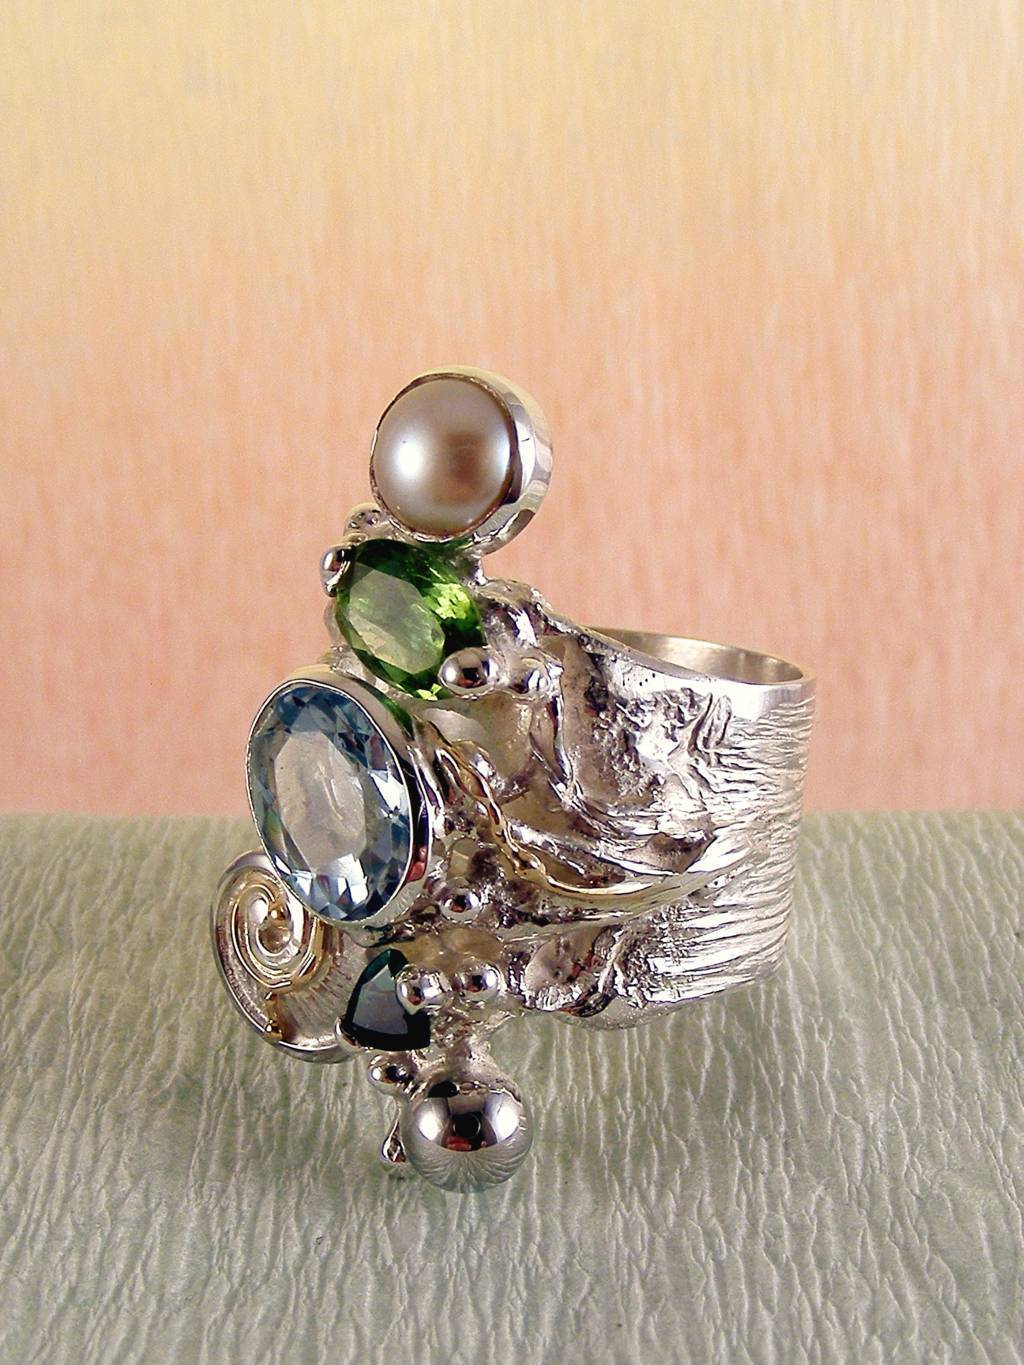 gegory pyra piro ring 1441, mixed metal jewellery from silver and gold, rings for women with blue topaz and peridot, rings for women with green tourmaline and pearl, rings for women with blue topaz and pearls, rings for women with blue topaz and green tourmaline, rings in art and craft galleries